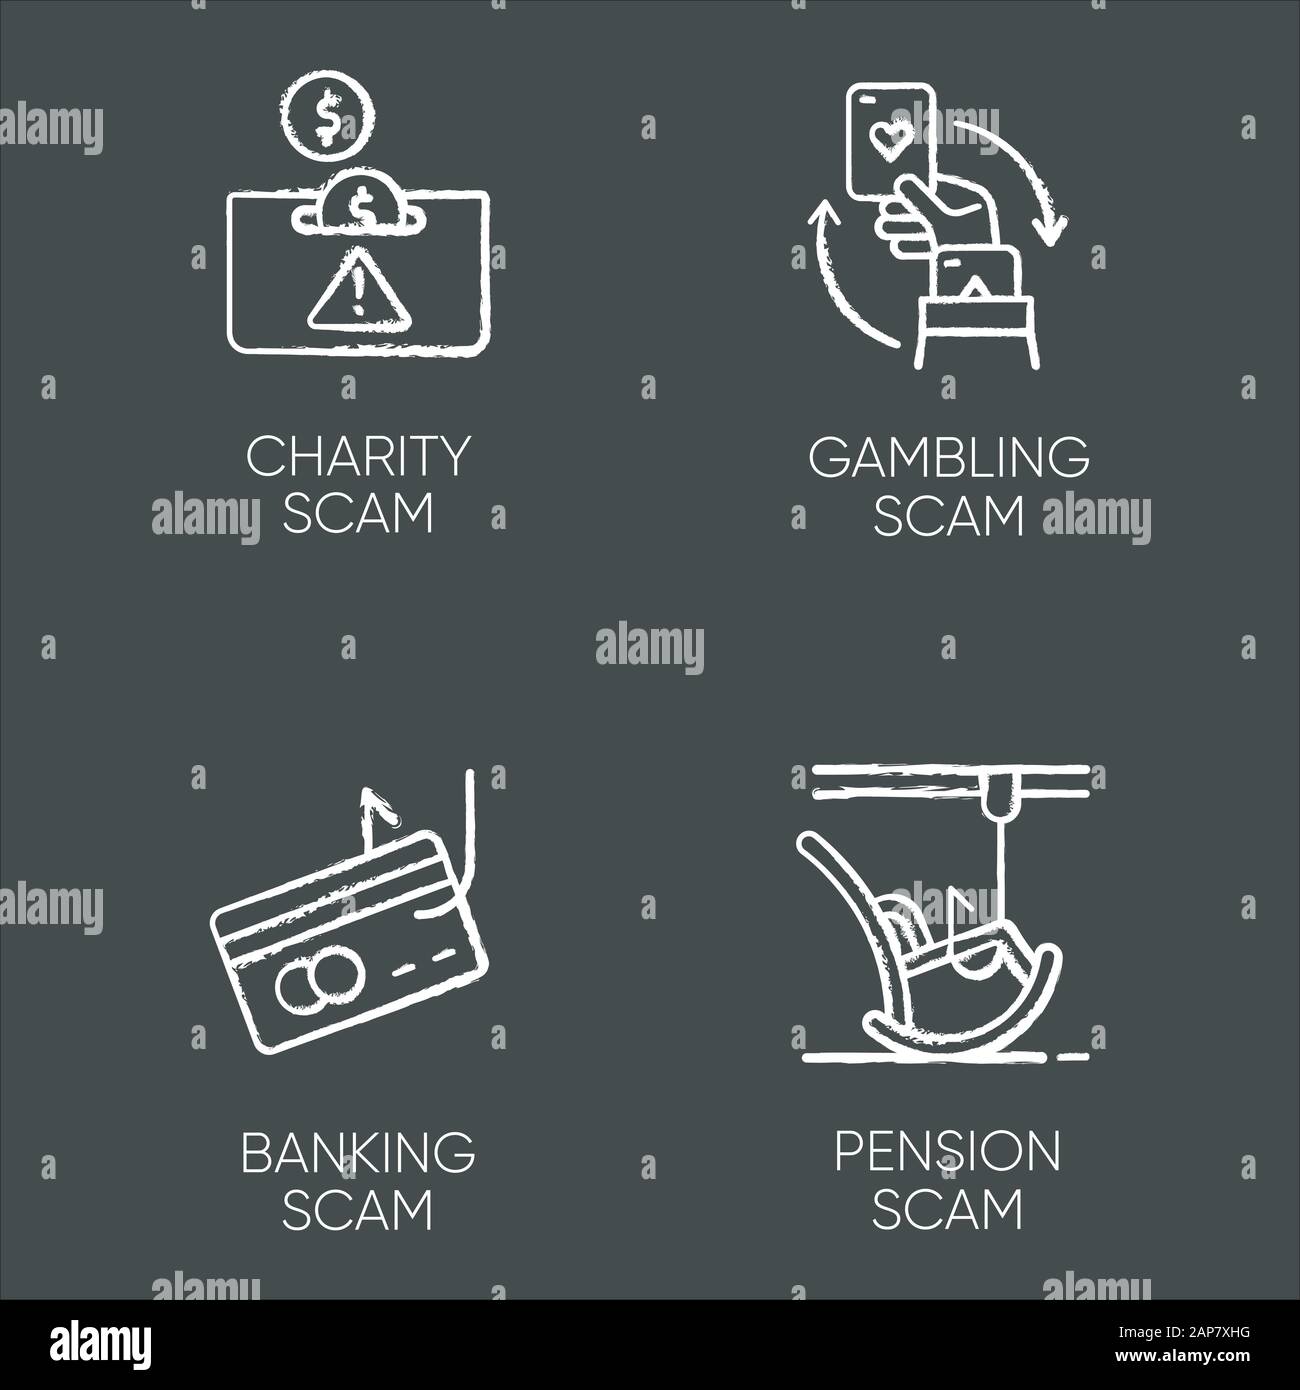 Scam types chalk icons set. Charity, pension fraudulent scheme. Gambling, banking trick. Cybercrime. Financial scamming. Illegal money gain. Isolated Stock Vector